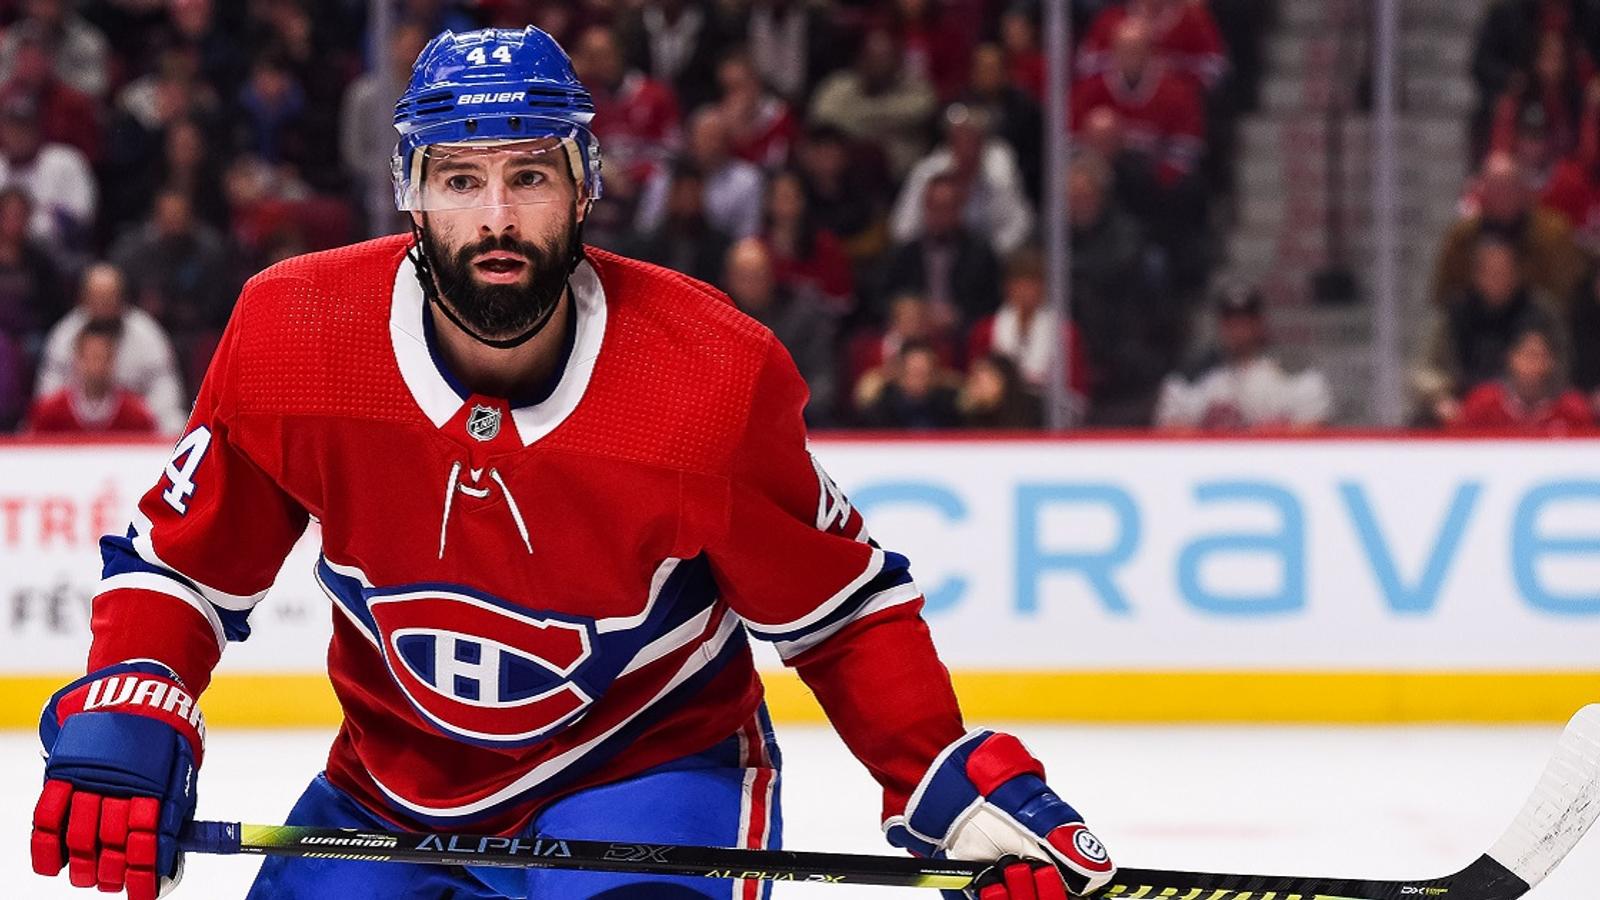 Former Canadiens forward Nate Thompson has some words for Carey Price.